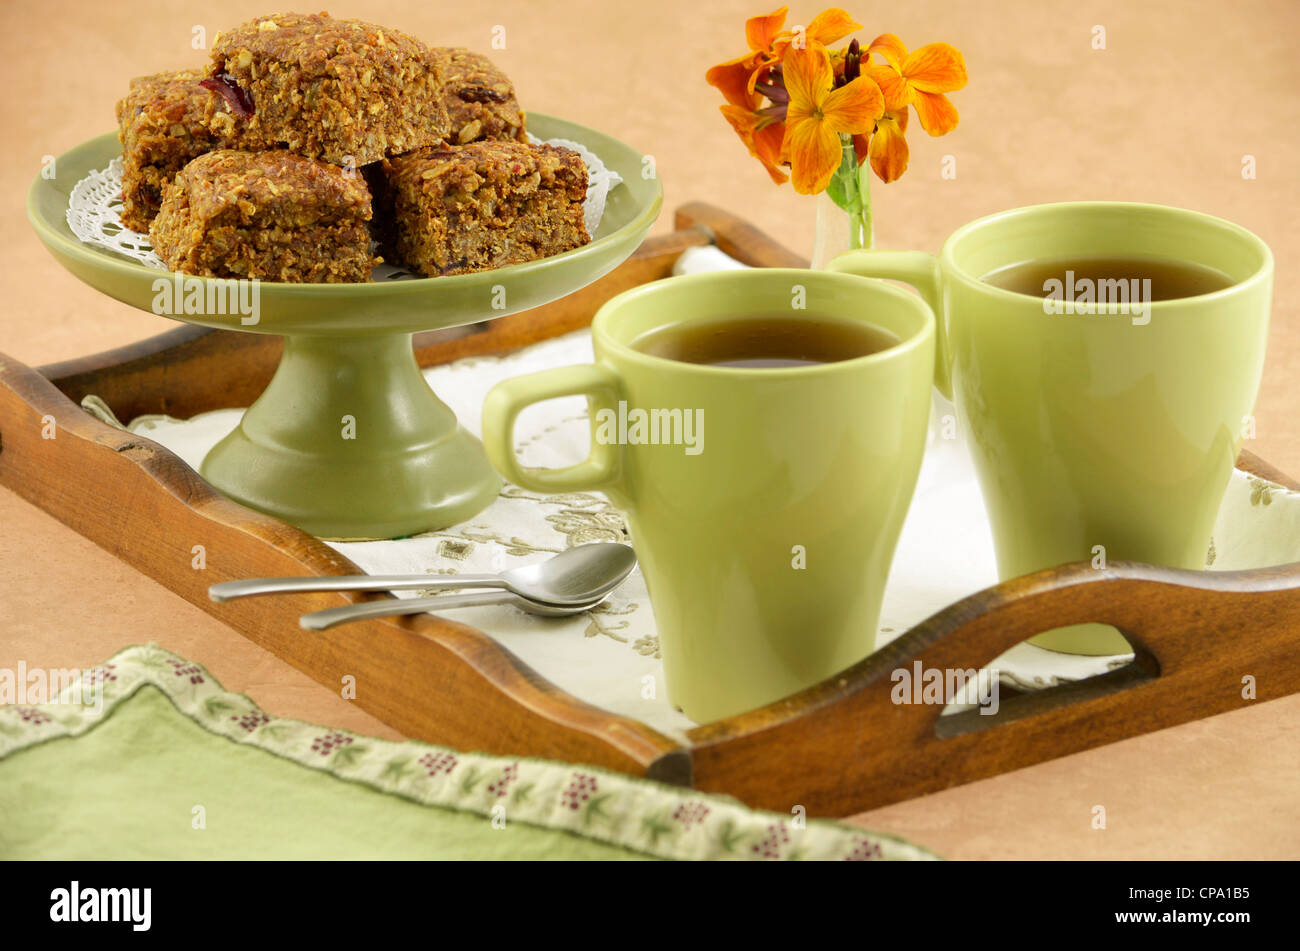 Healthy homemade granola squares with mugs of tea on wooden tray Stock Photo